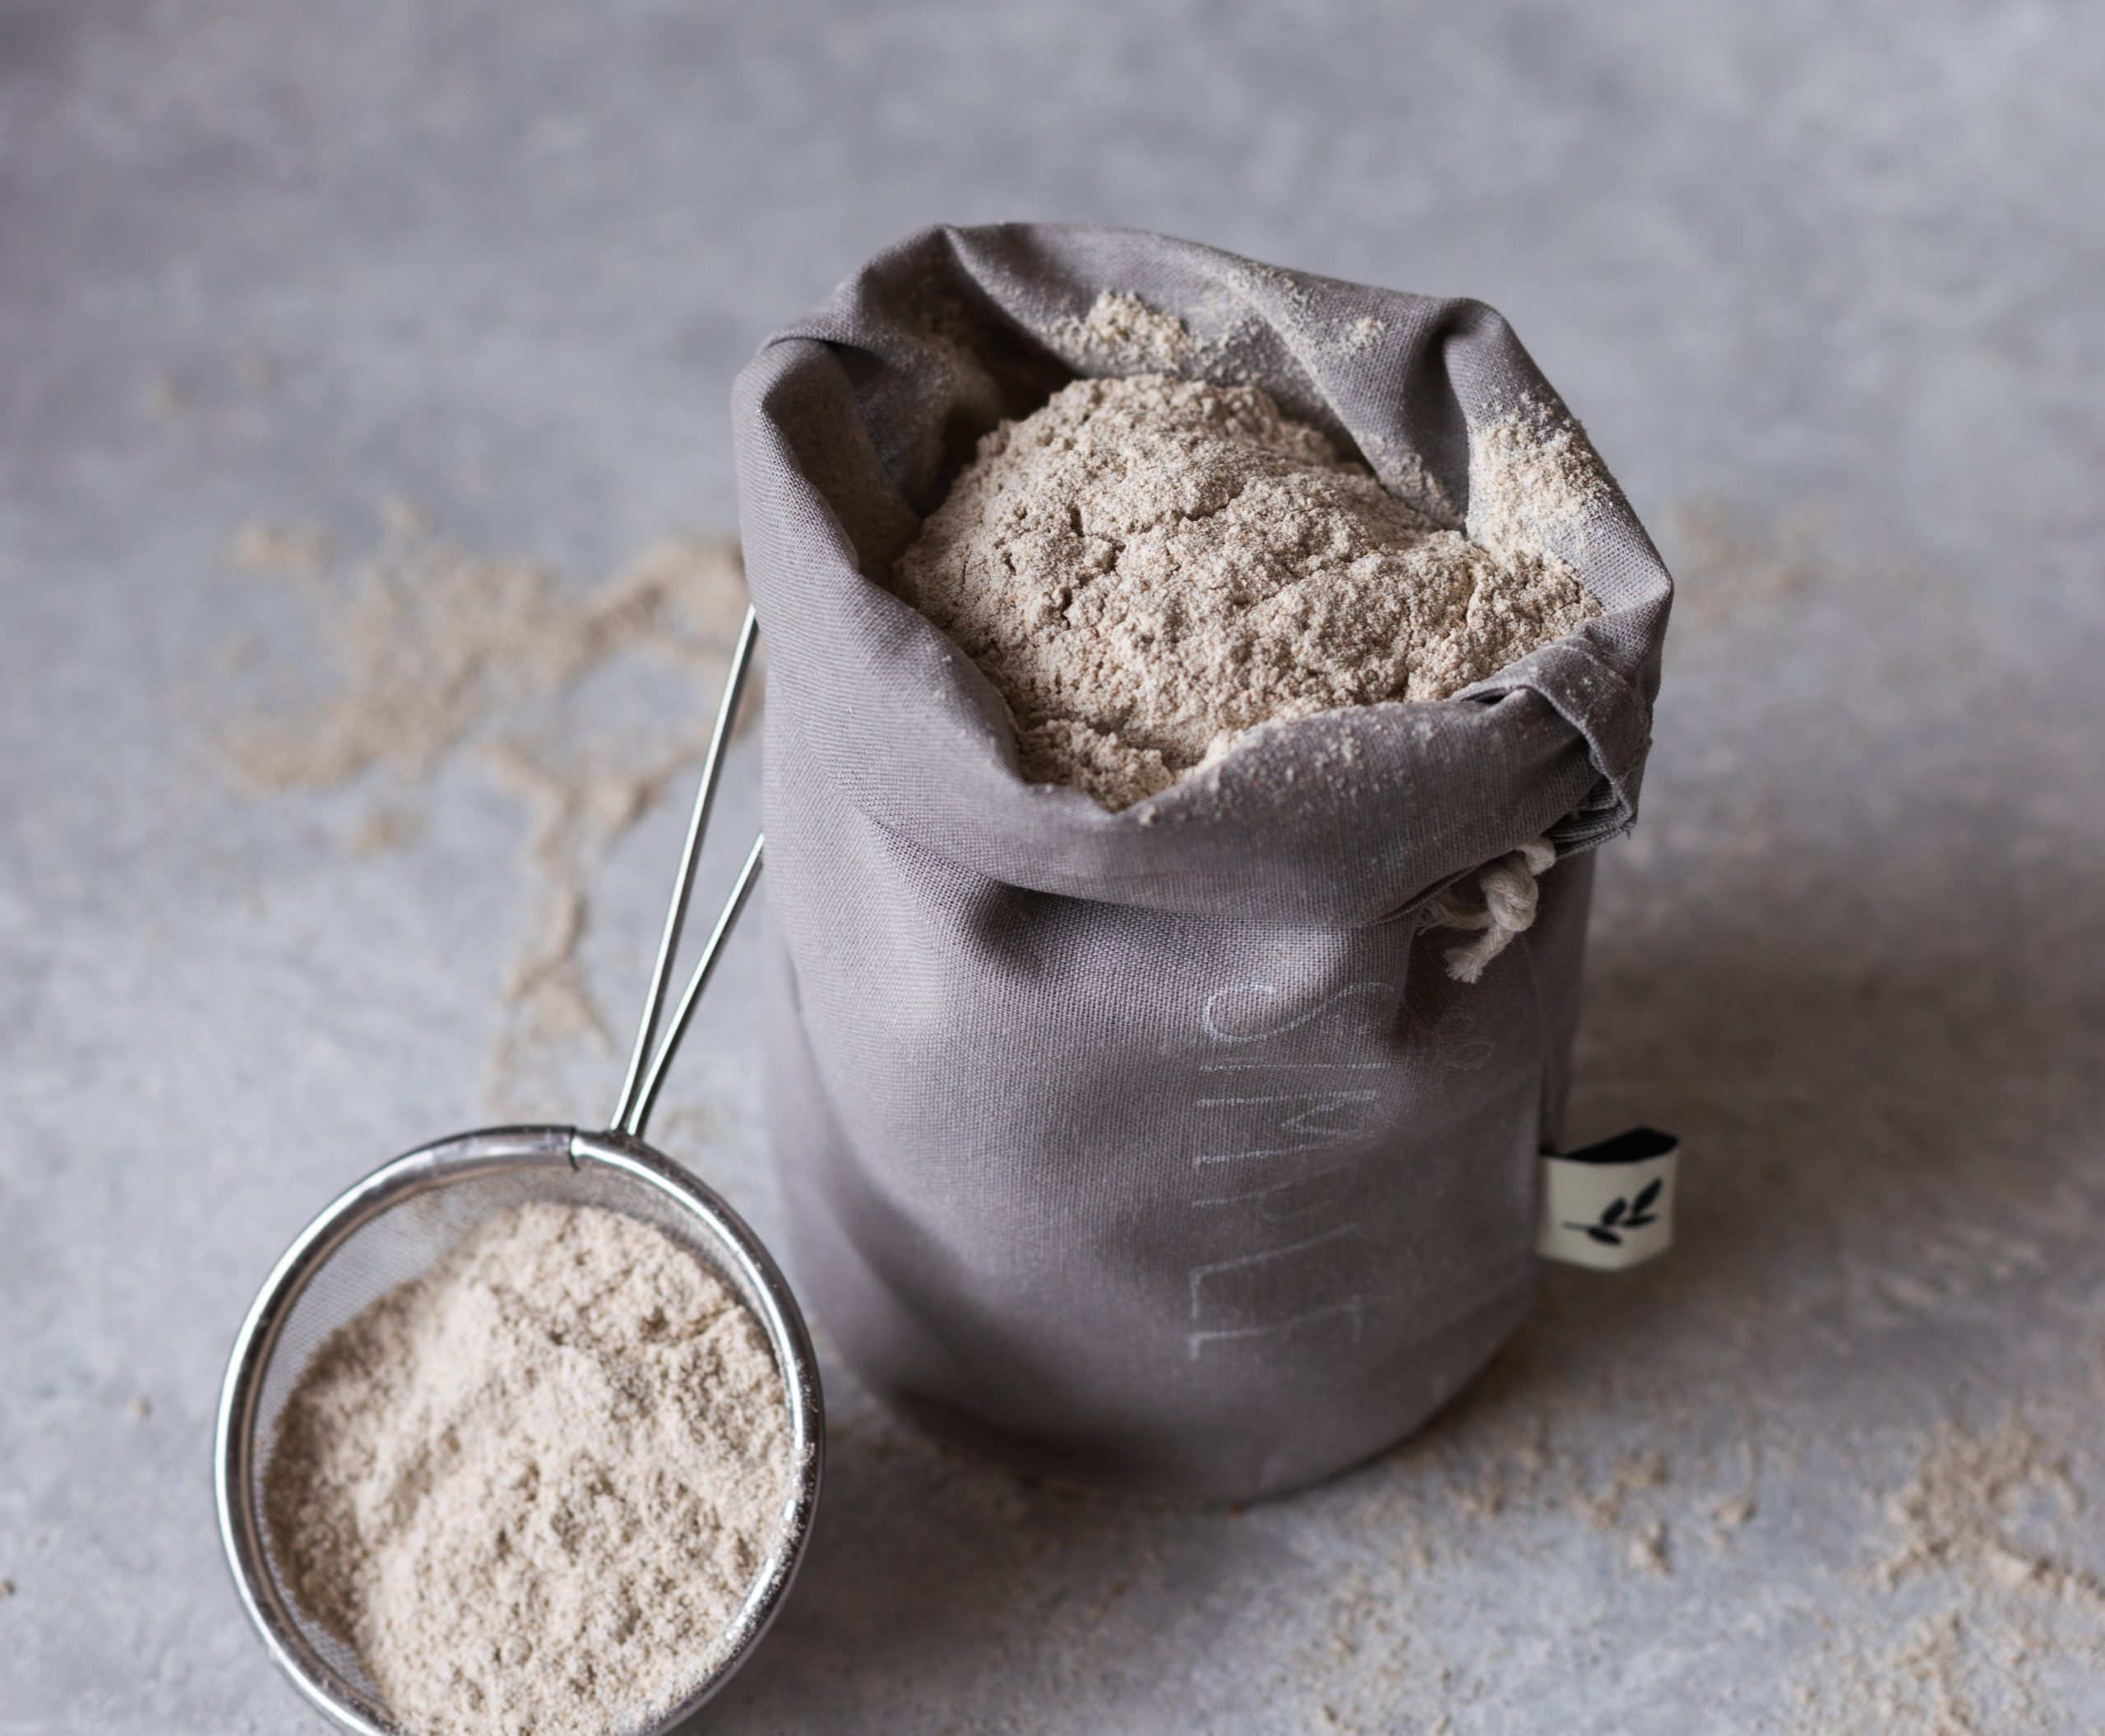 Demand for natural methods and organic flour rises